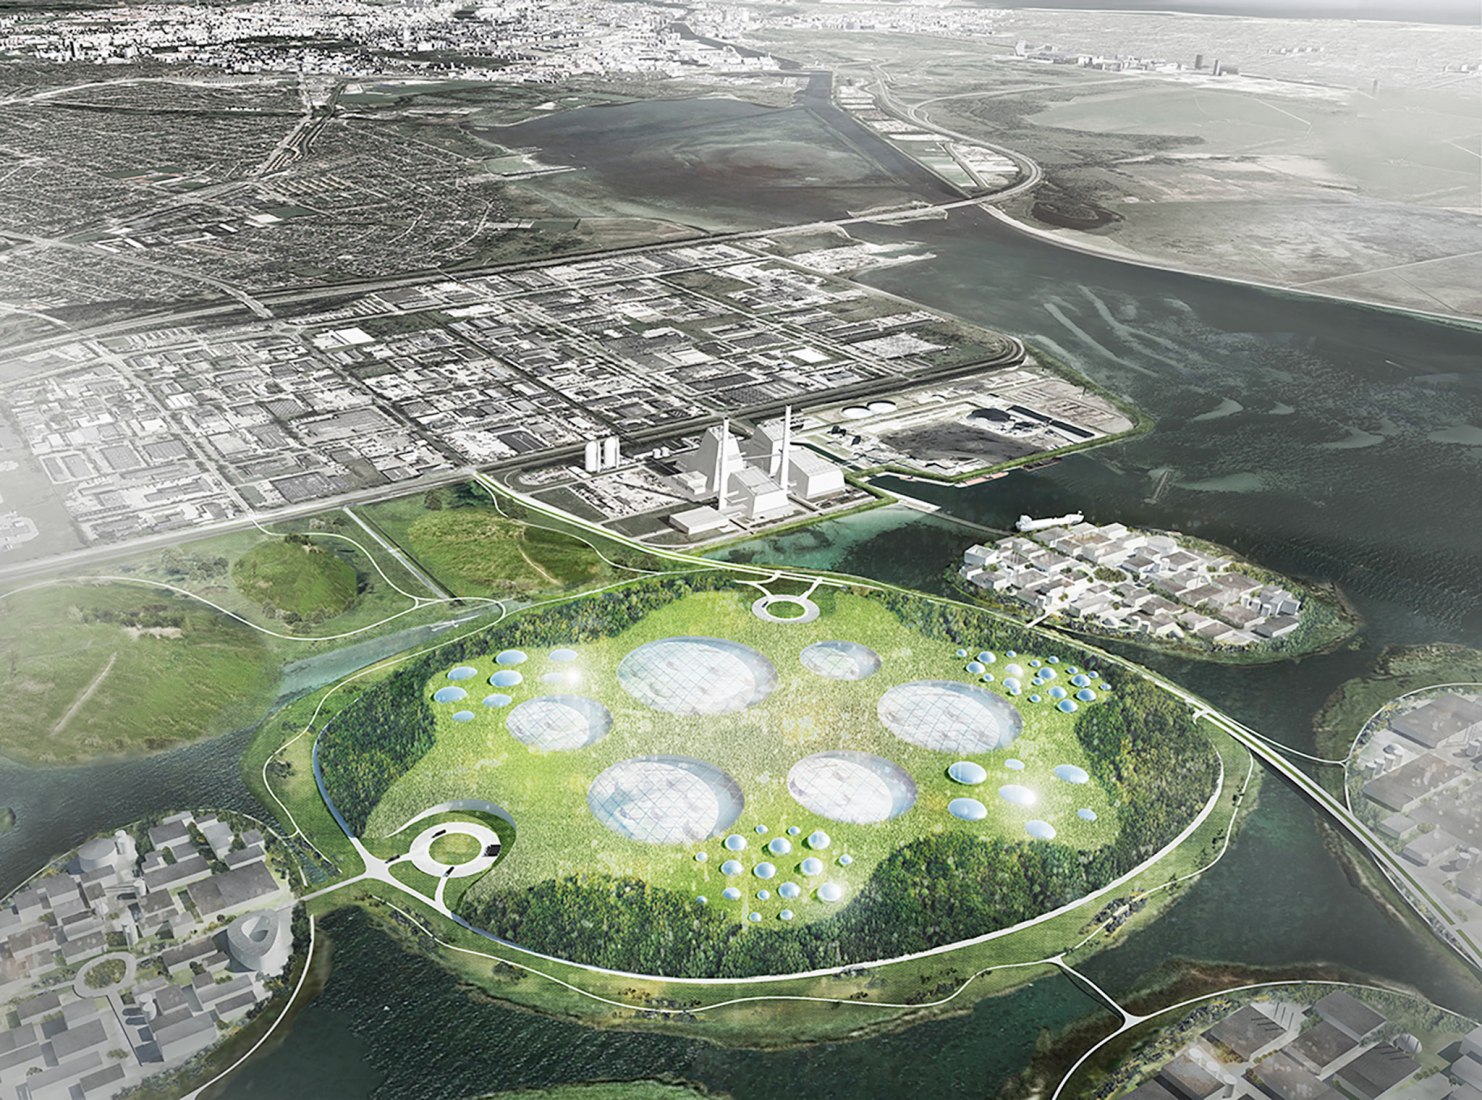 Denmark plans 'European Silicon Valley' on 9 artificial islands. Image by Urban Power for Hvidovre municipality